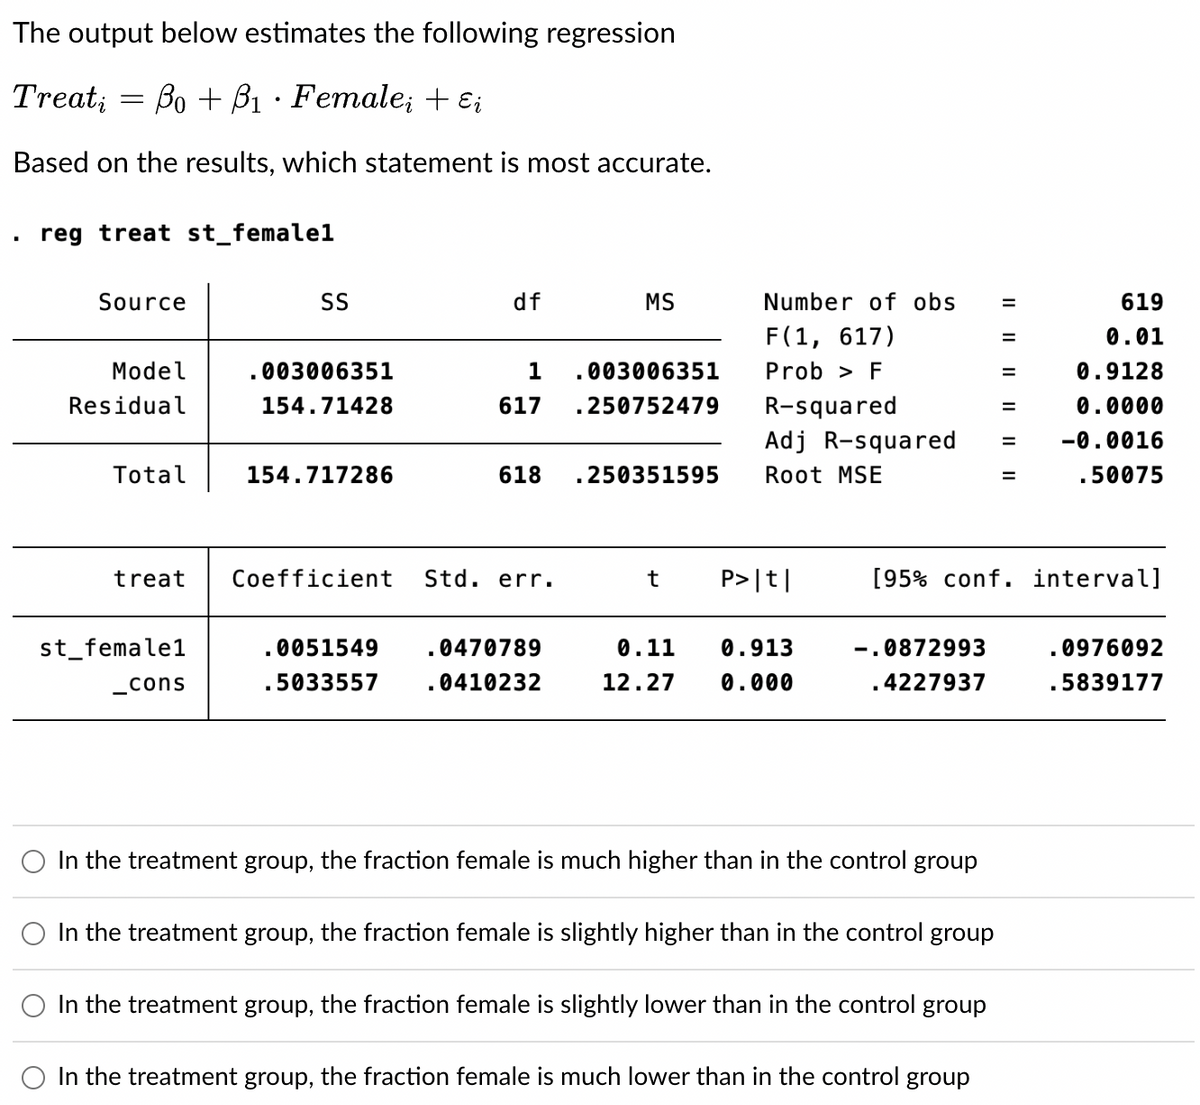 The output below estimates the following regression
Treati
=
•
Bo B1 Female; + ɛi
Based on the results, which statement is most accurate.
reg treat st_femalel
Source
SS
df
MS
Number of obs =
619
F(1, 617)
=
0.01
Model
Residual
.003006351
154.71428
1 .003006351
617 .250752479
Prob > F
R-squared
=
0.9128
=
0.0000
Total
154.717286
618 250351595
Adj R-squared
Root MSE
=
-0.0016
=
.50075
treat
Coefficient Std. err.
t
P>|t|
[95% conf. interval]
st_female1
_cons
.0051549
.5033557
.0470789
0410232
0.11 0.913
12.27 0.000
0872993
0976092
4227937
.5839177
In the treatment group, the fraction female is much higher than in the control group
In the treatment group, the fraction female is slightly higher than in the control group
In the treatment group, the fraction female is slightly lower than in the control group
In the treatment group, the fraction female is much lower than in the control group